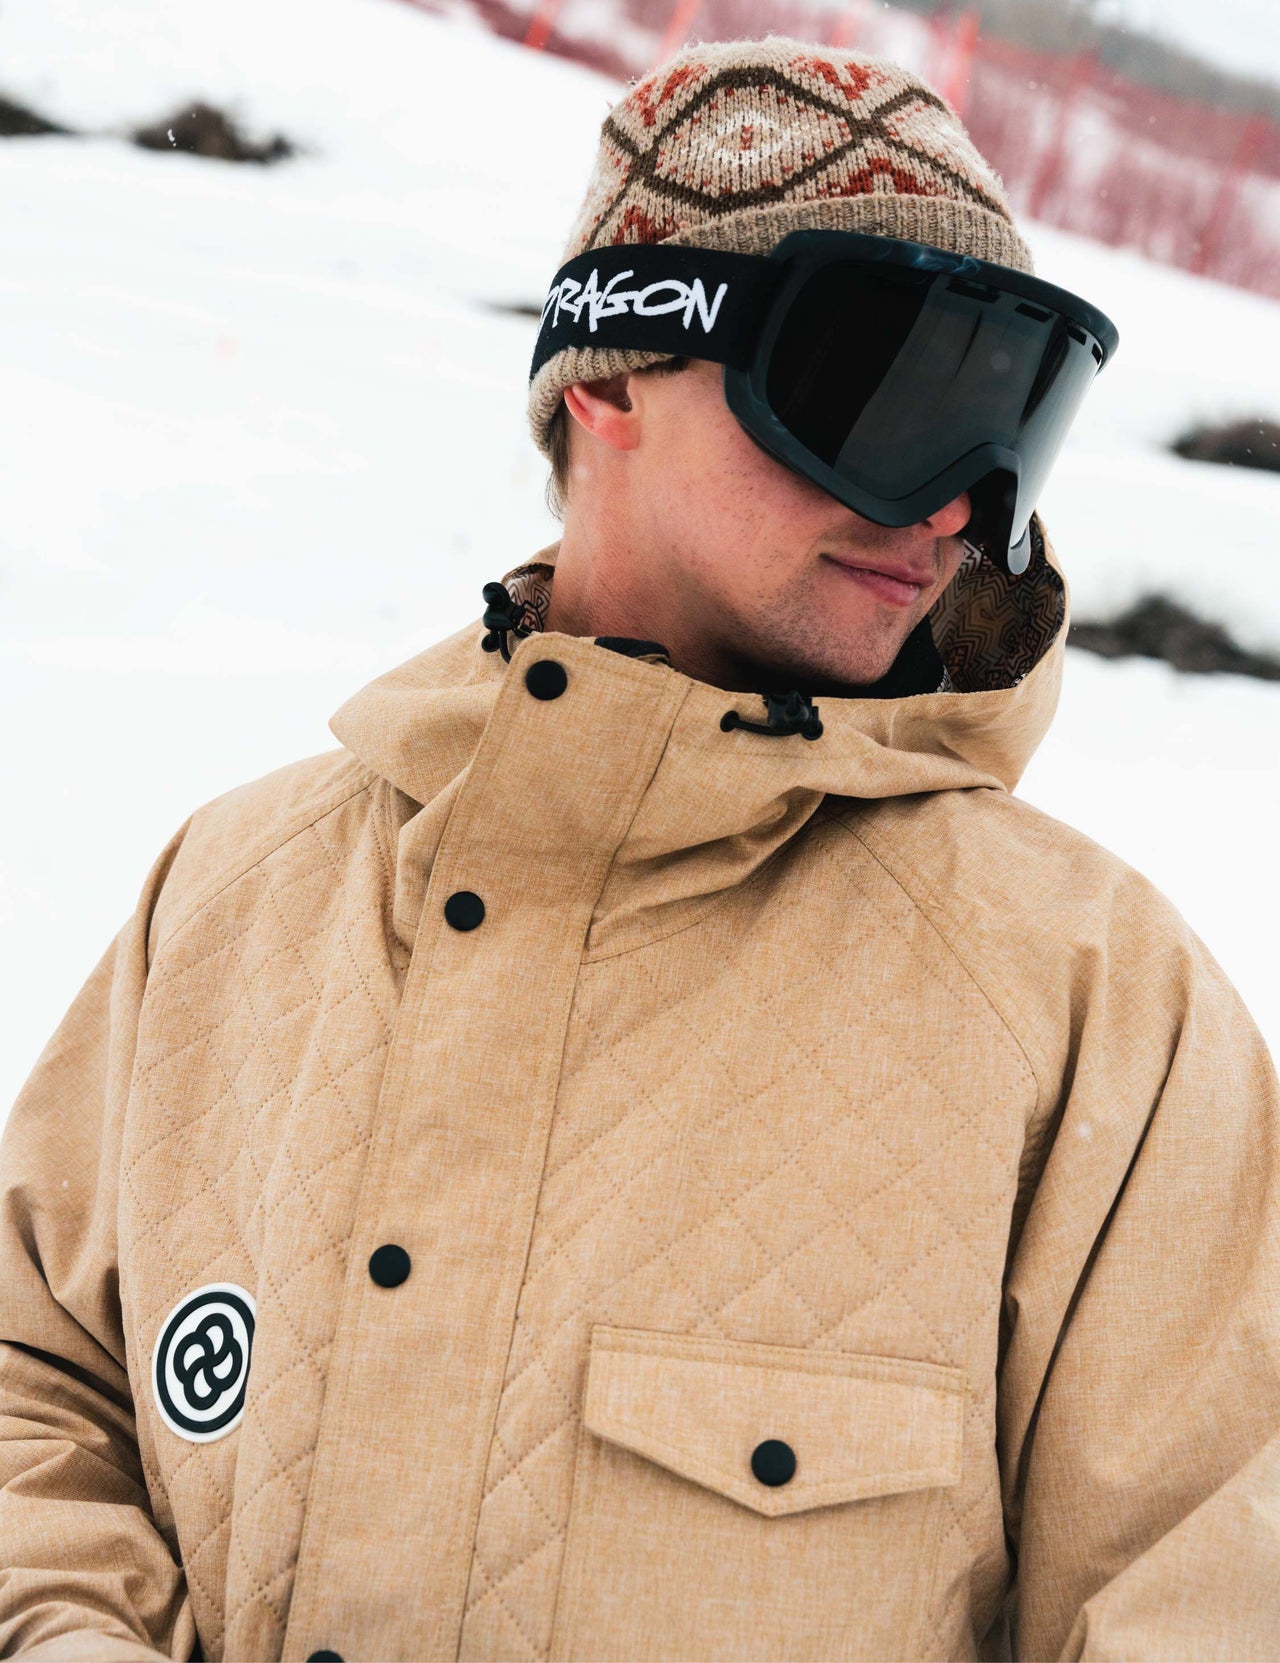 Bloom Outerwear Black Friday and Cyber Monday